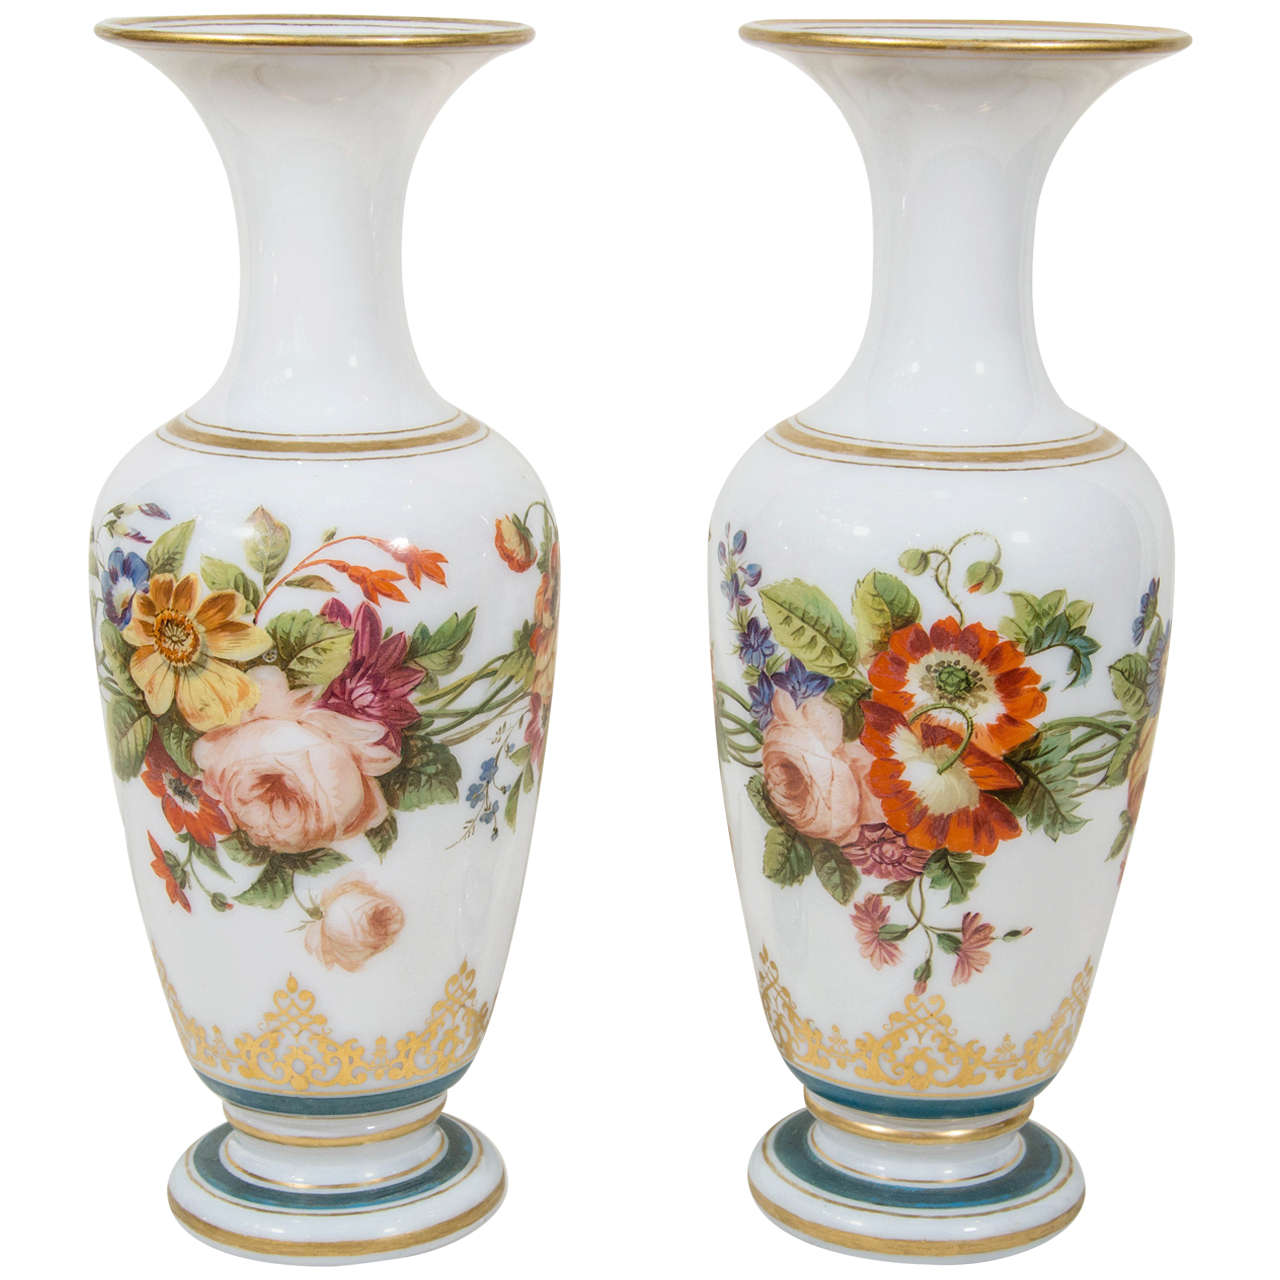 Pair of Antique Opaline Glass Vases with Hand-Painted Roses and Other Flowers